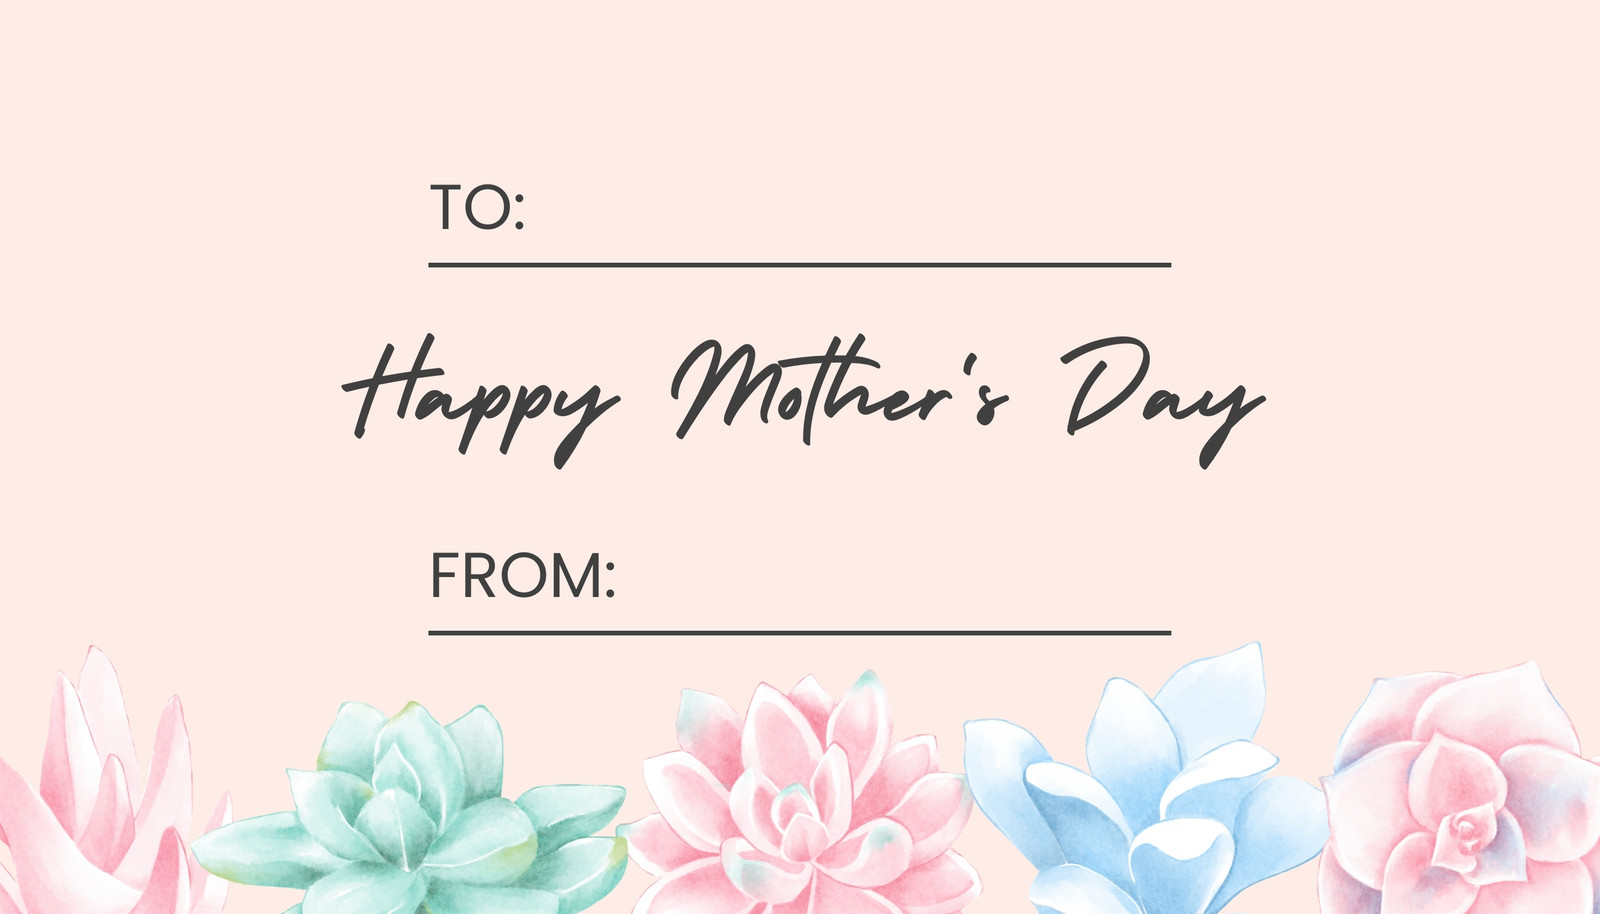 https://marketplace.canva.com/EAE85fYkGXI/2/0/1600w/canva-pastel-pink%2C-blue%2C-and-green-floral-mother%27s-day-tag-uqWiMuA_yoU.jpg